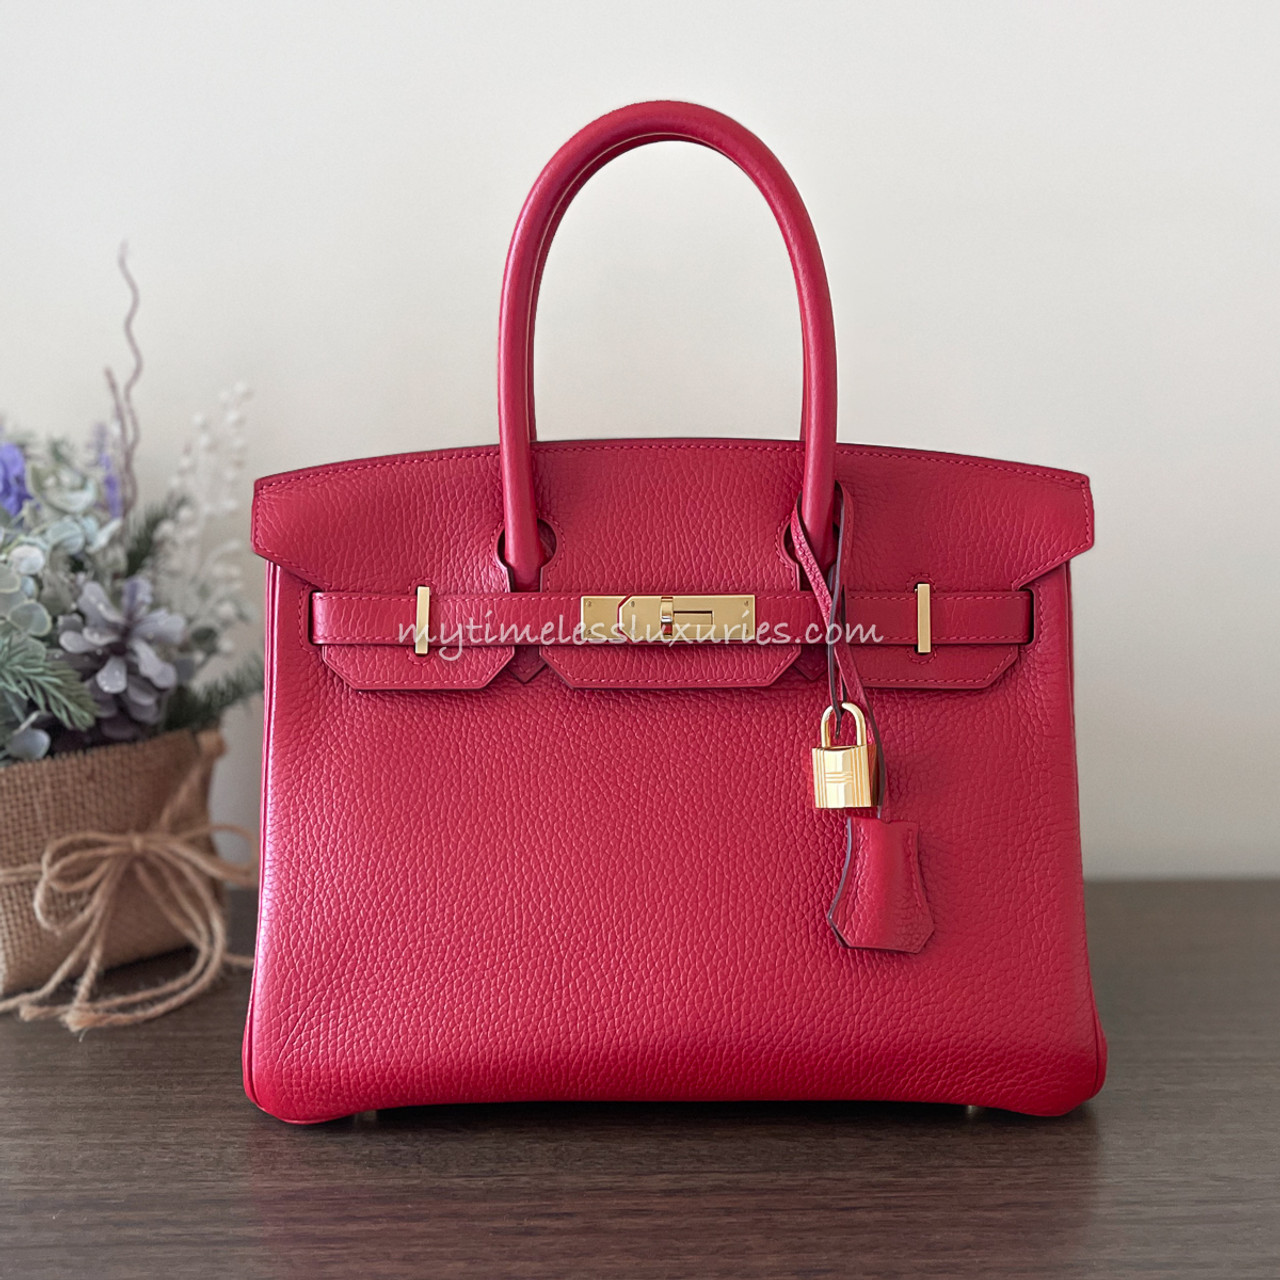 HERMES CABASELLIER 30 ROUGE CLEMENCE